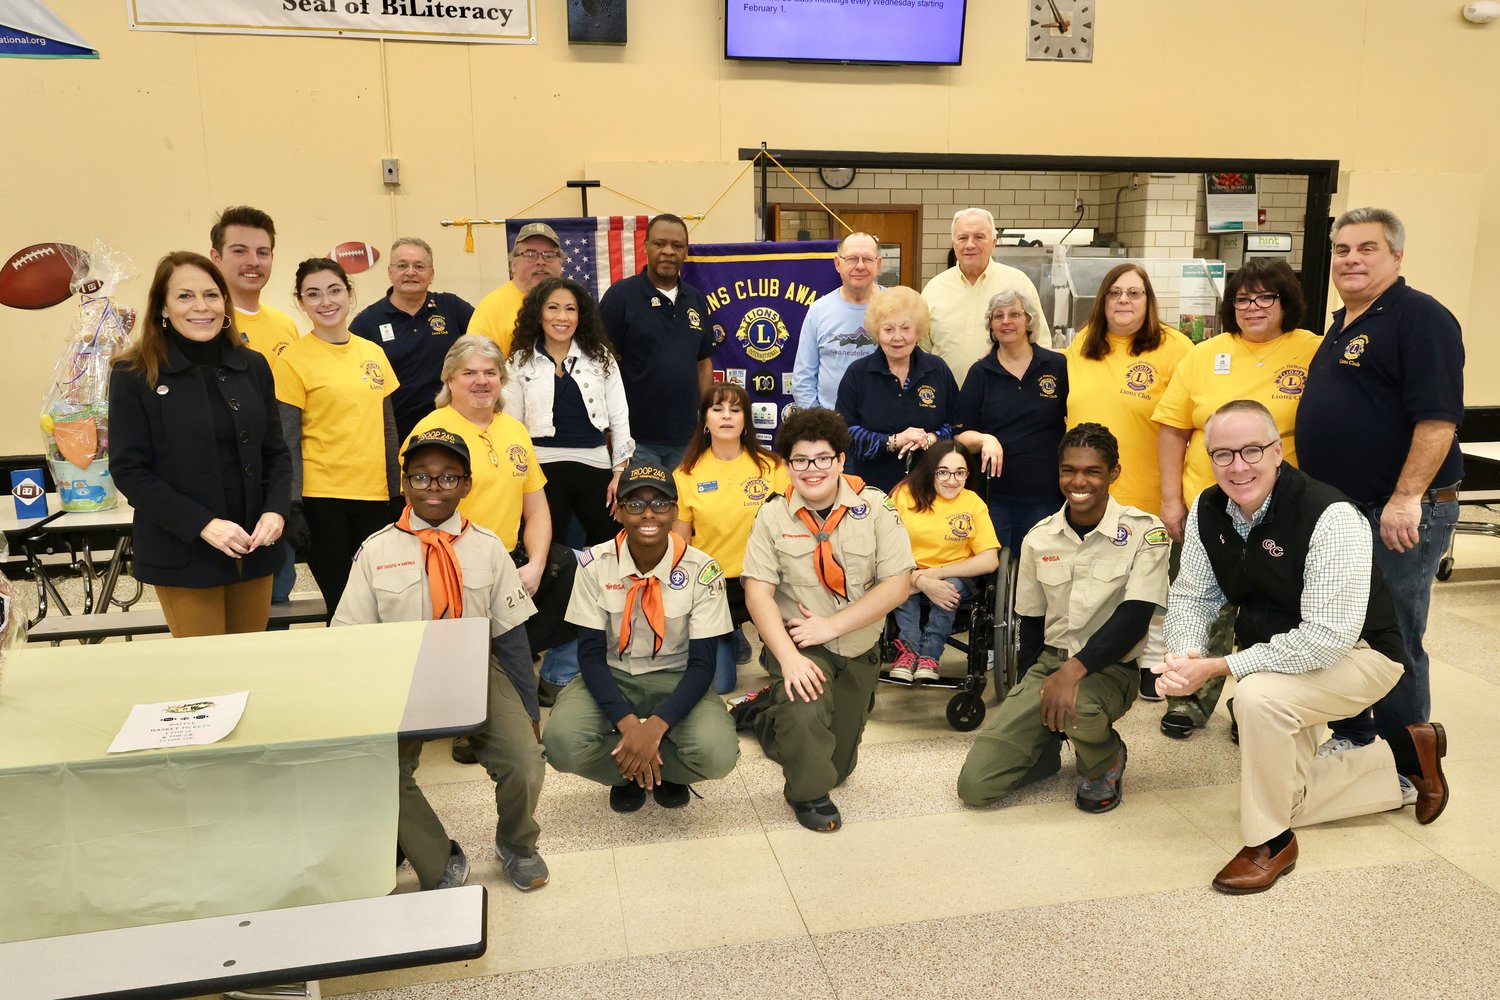 Town of Hempstead Supervisor Don Clavin, front row, right, with the Lions Club at the Super Bowl pancake breakfast on Feb. 12.